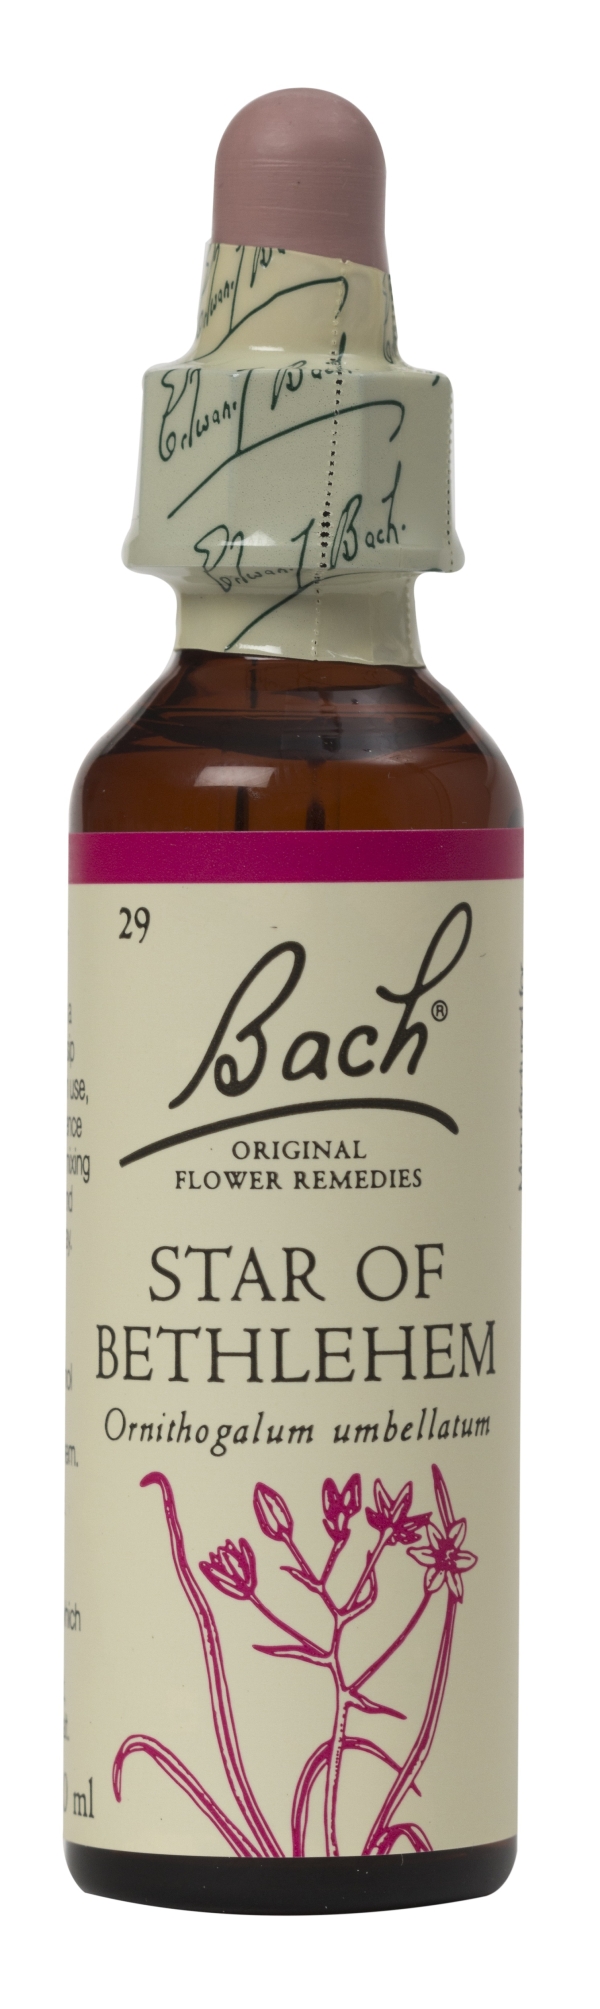 Nelson Bach Flower Remedies: Bach Star of Bethlehem Flower Remedy (20ml) available online here